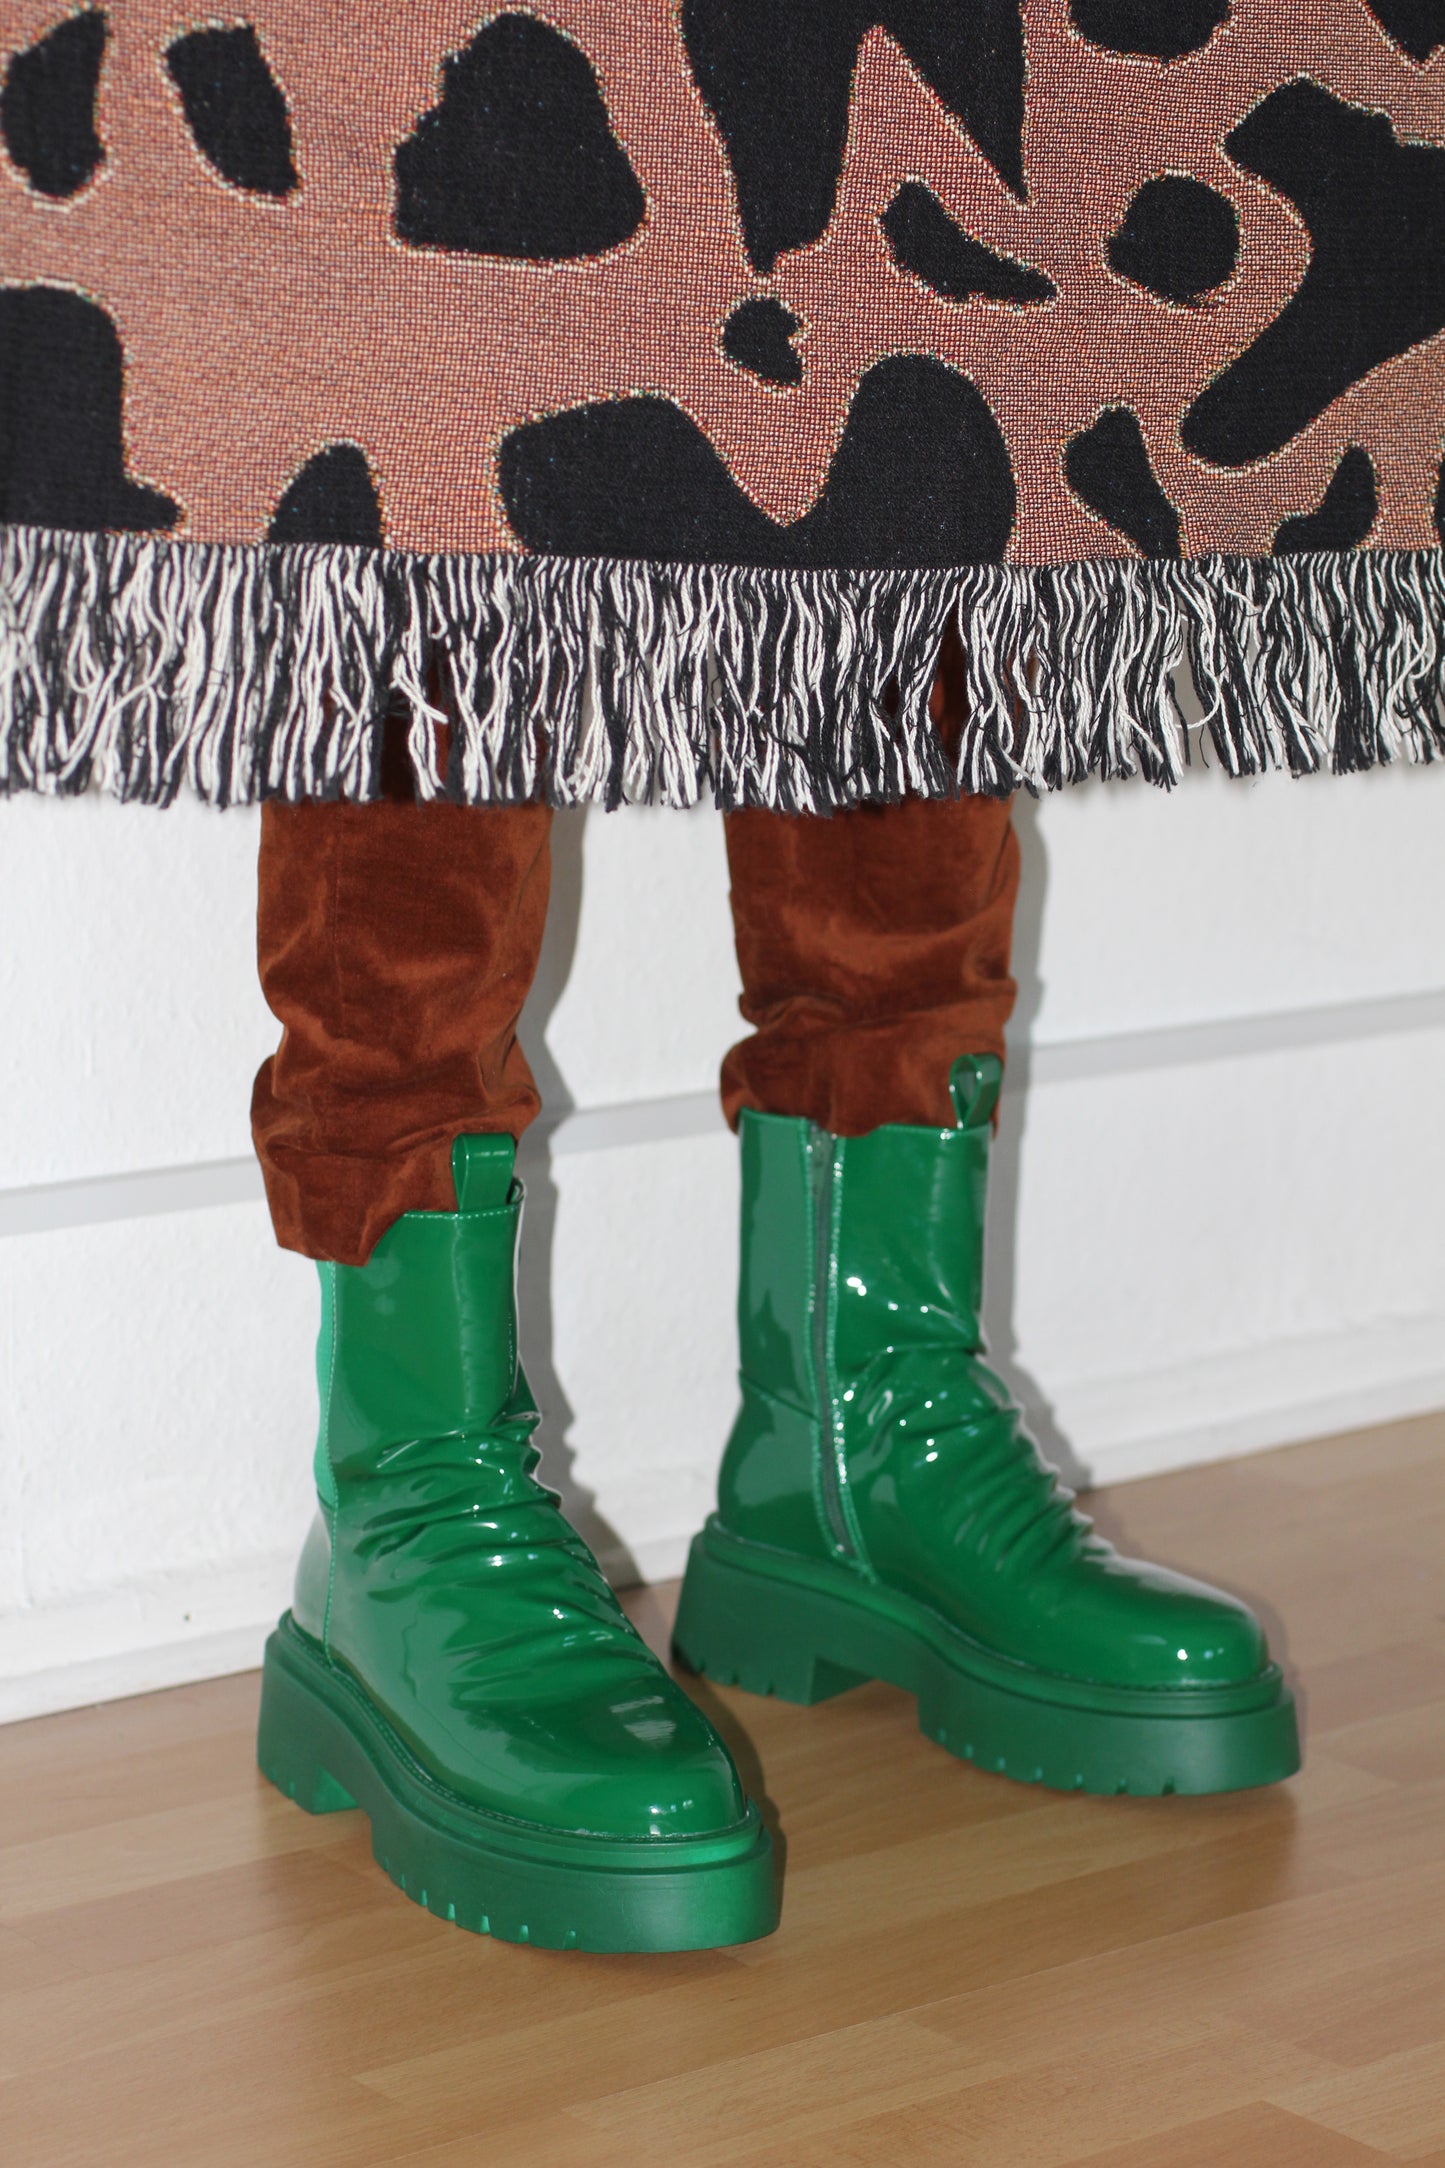 Wild thing woven throw blanket with green boots